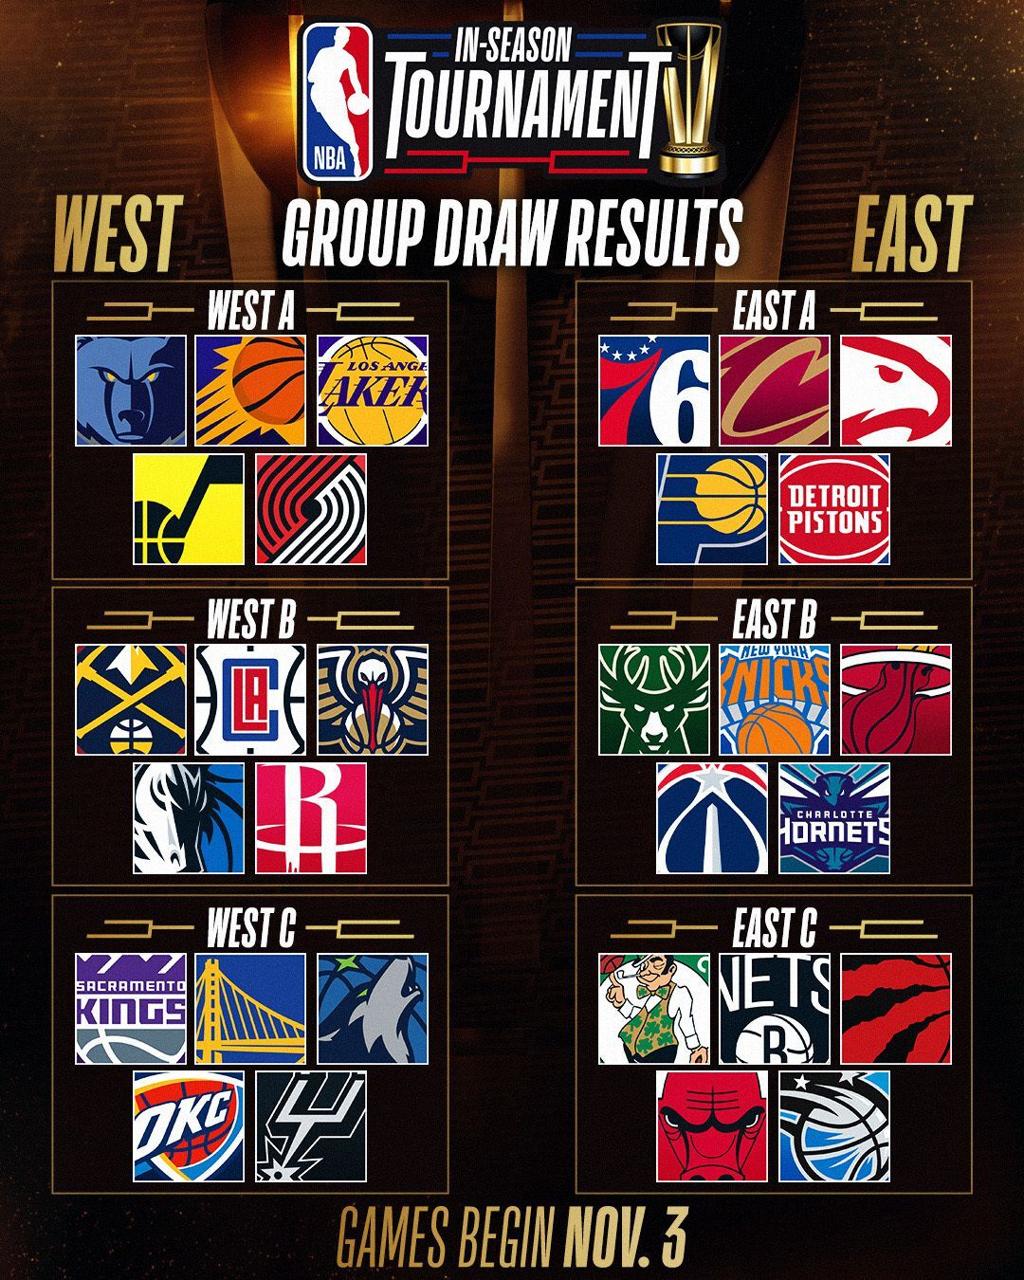 The wild card system in the NBA In-Season Tournament explained - AS USA